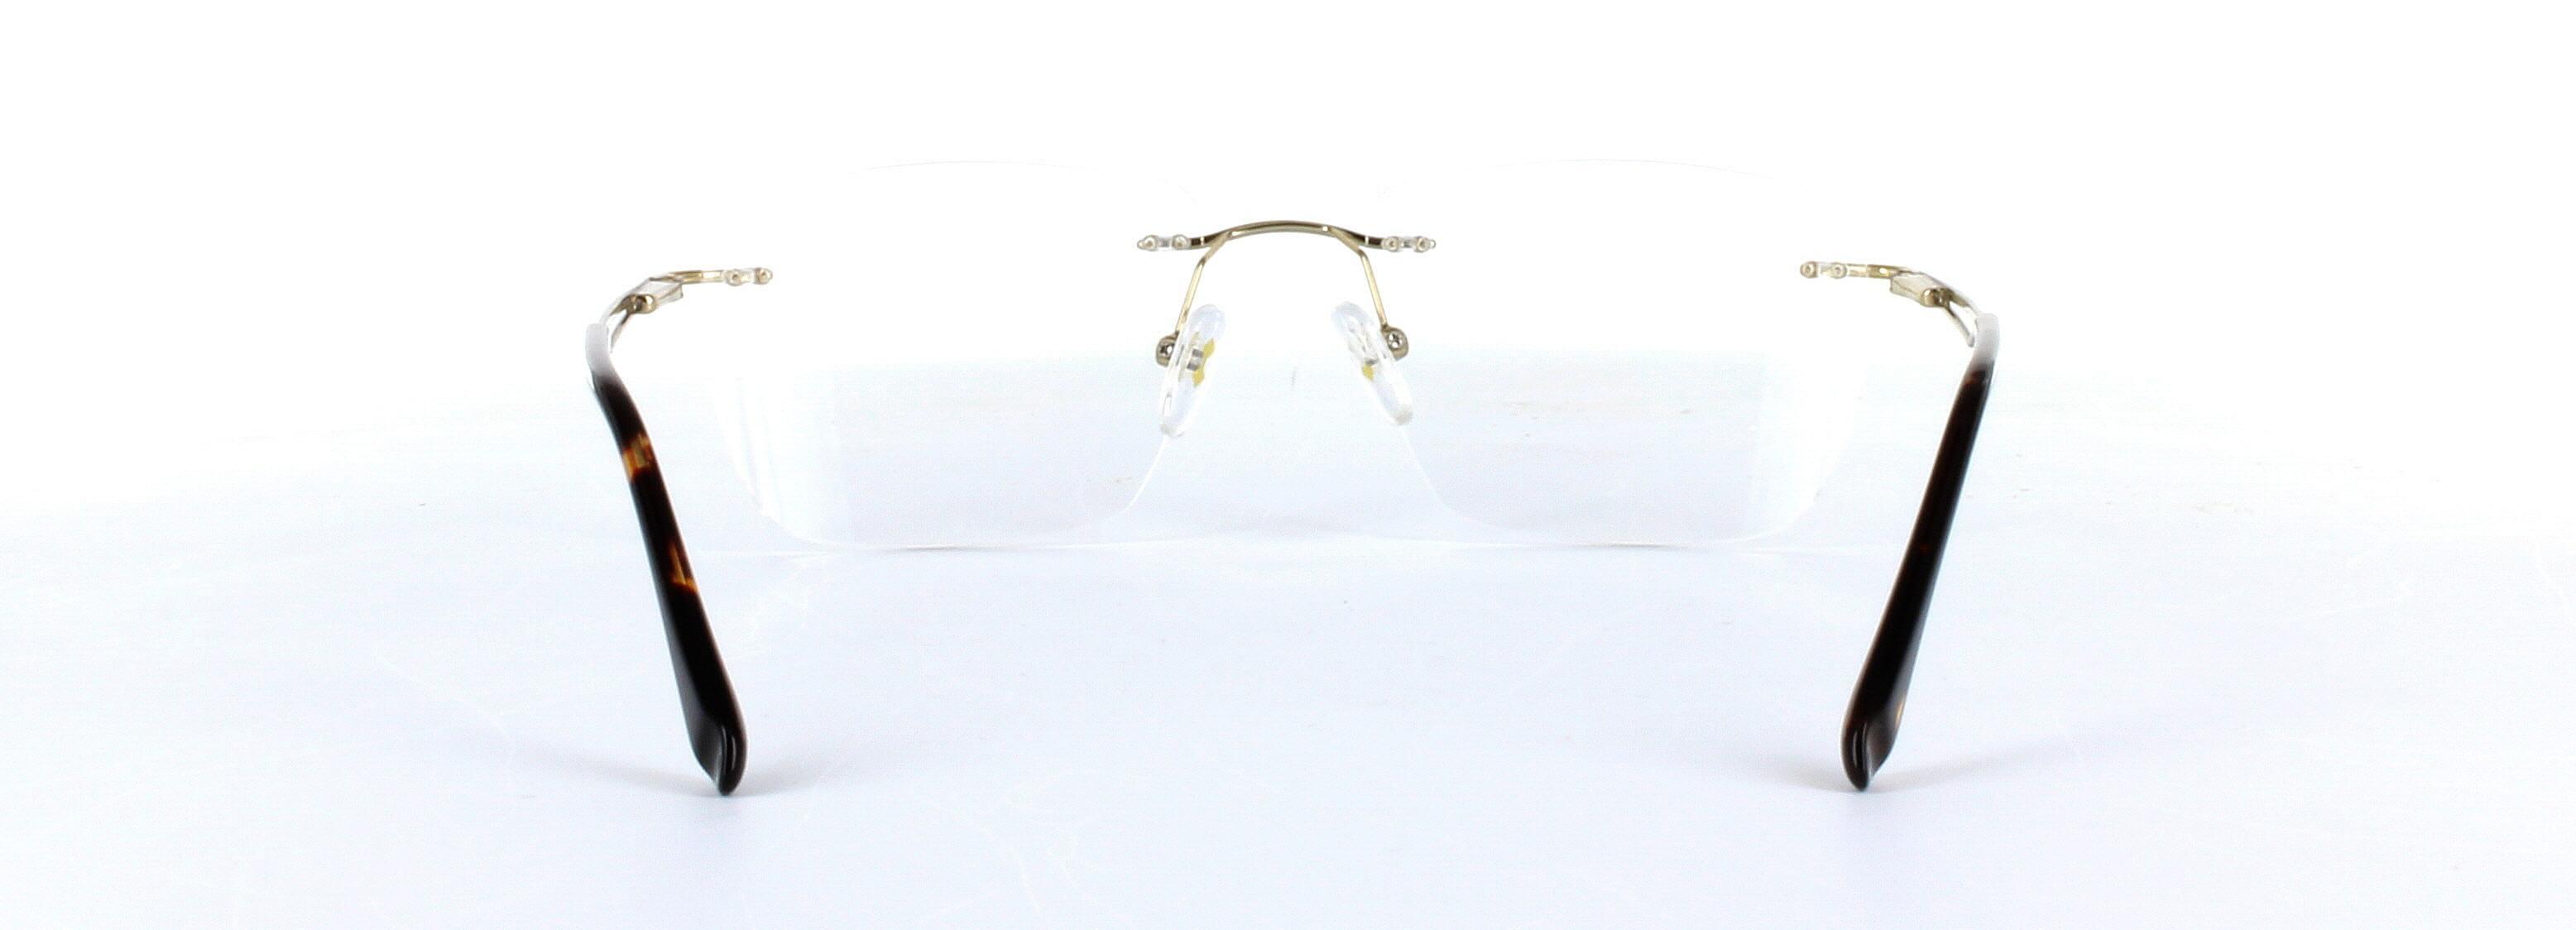 Ghost Gold Rimless Metal Glasses - Image View 3